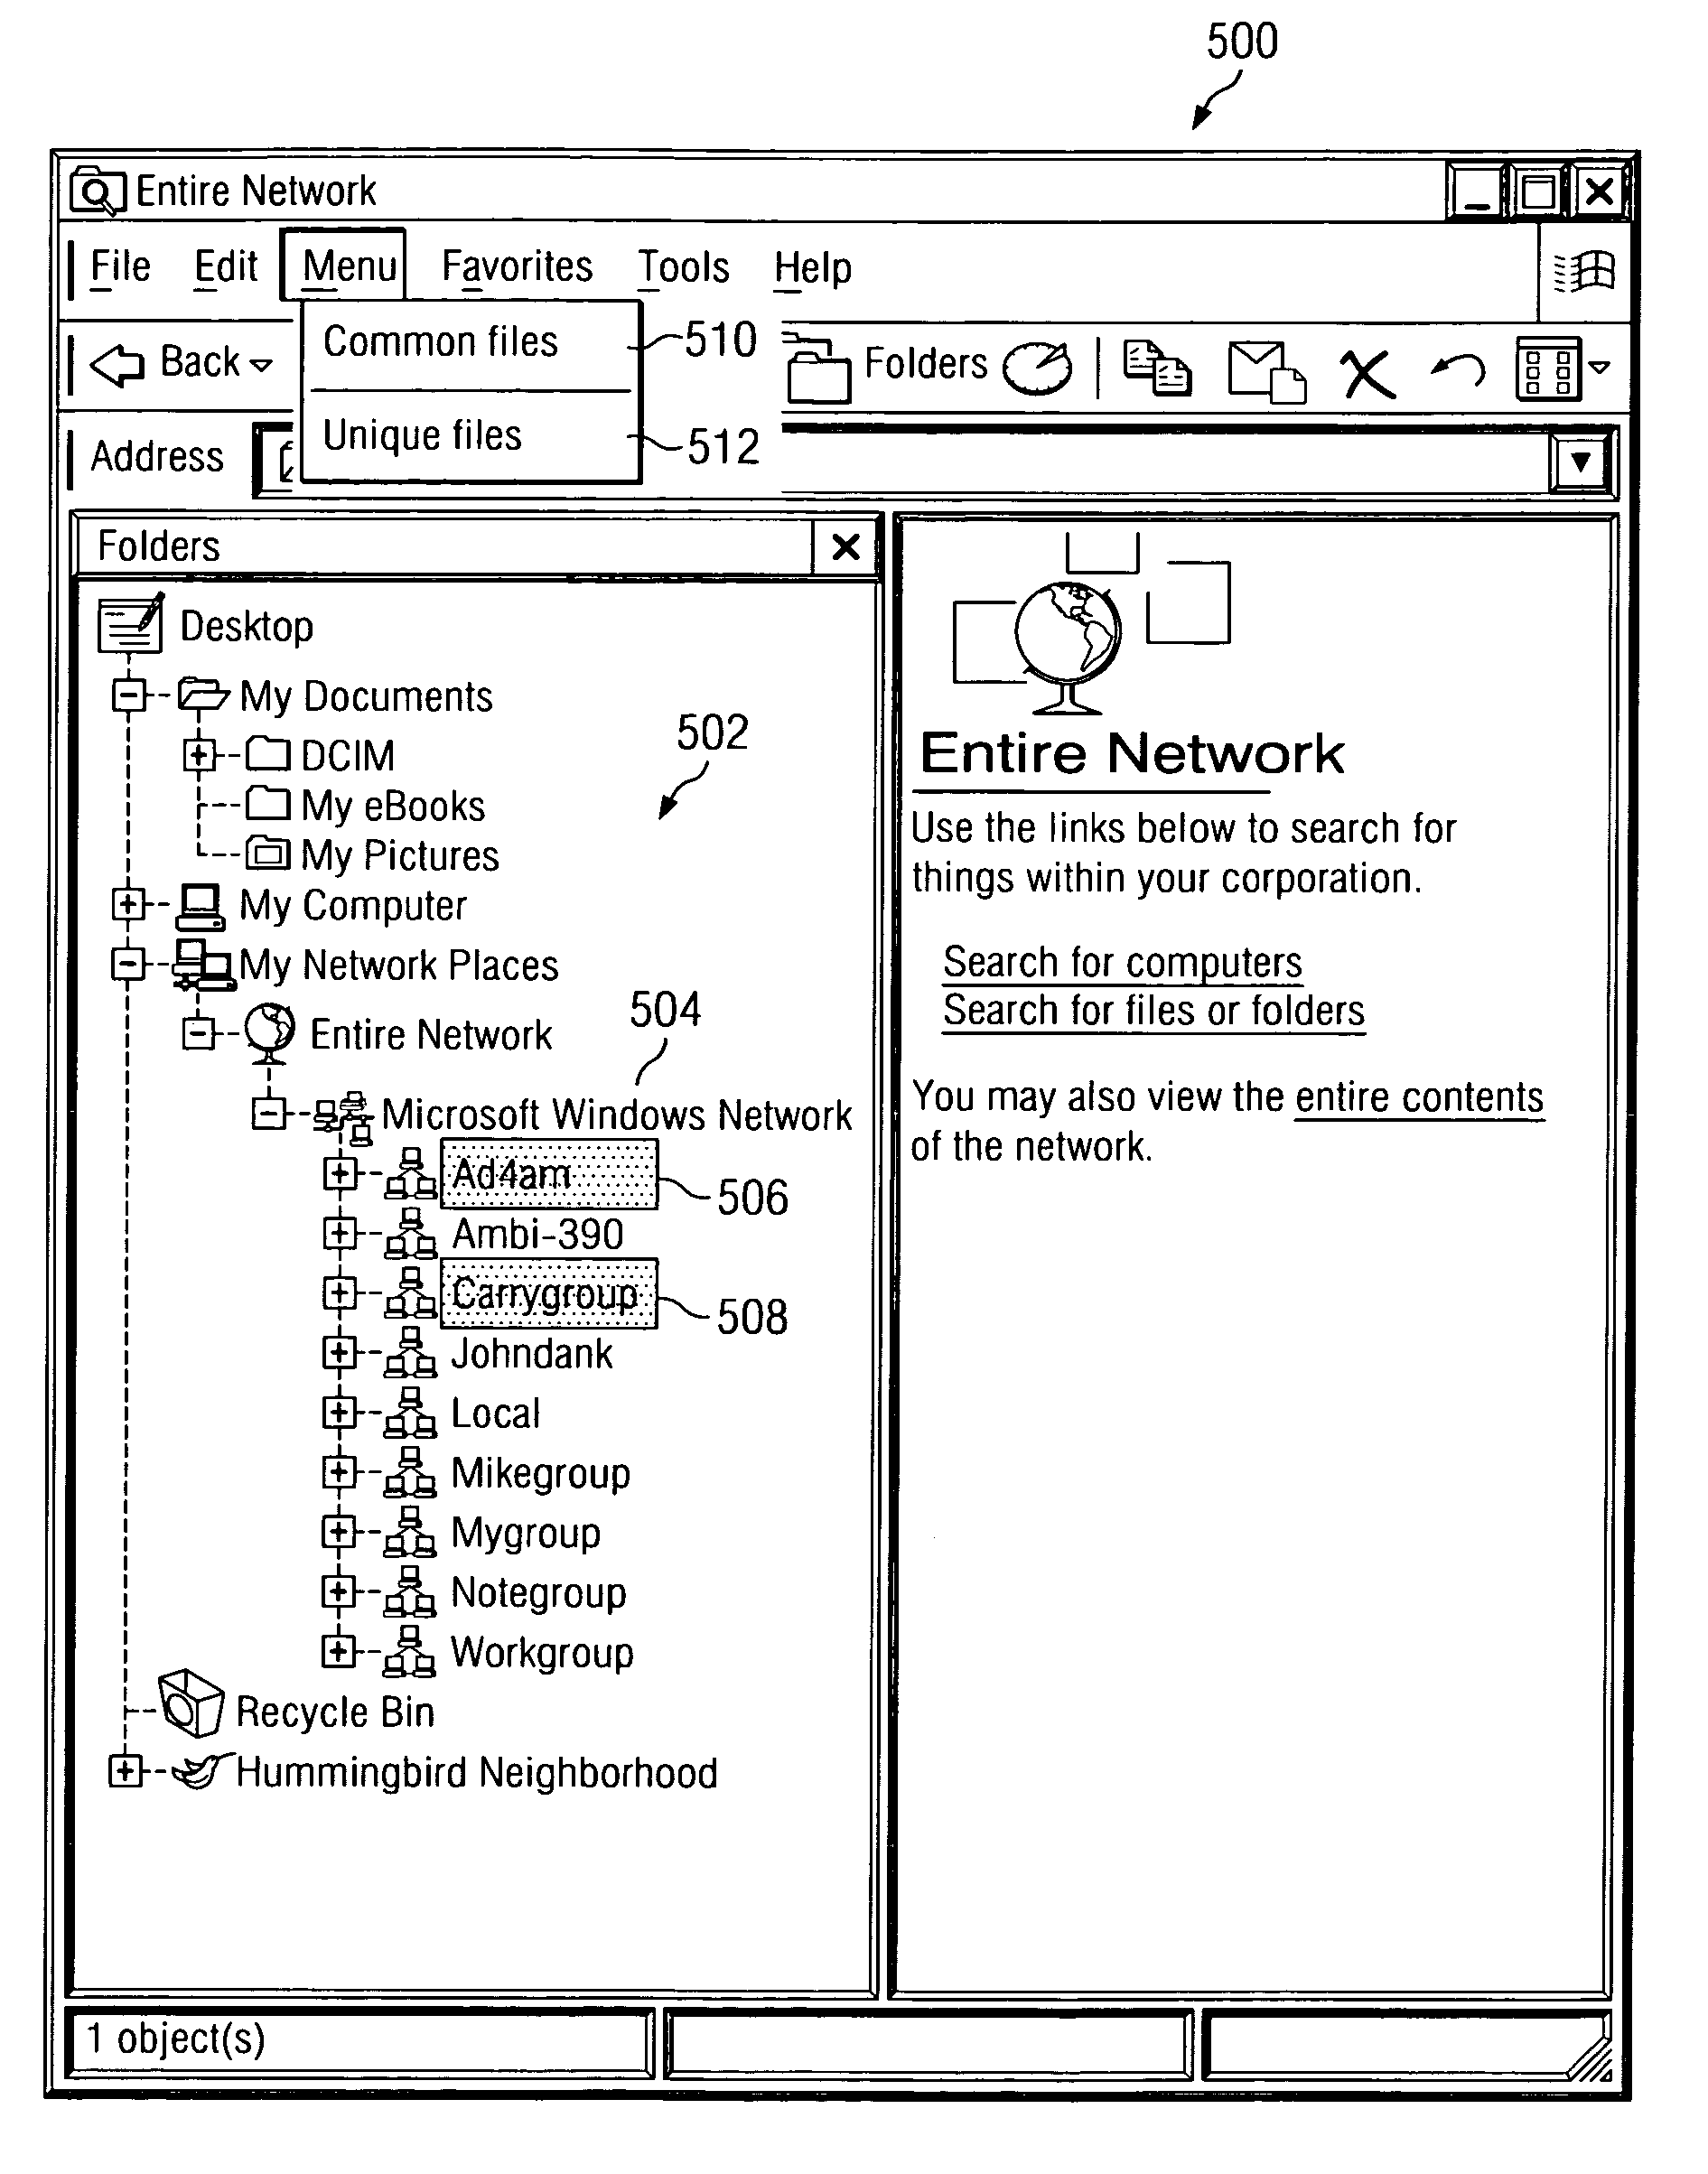 Explorer style file viewer for a group of machines which display meta views of files on a group of machines